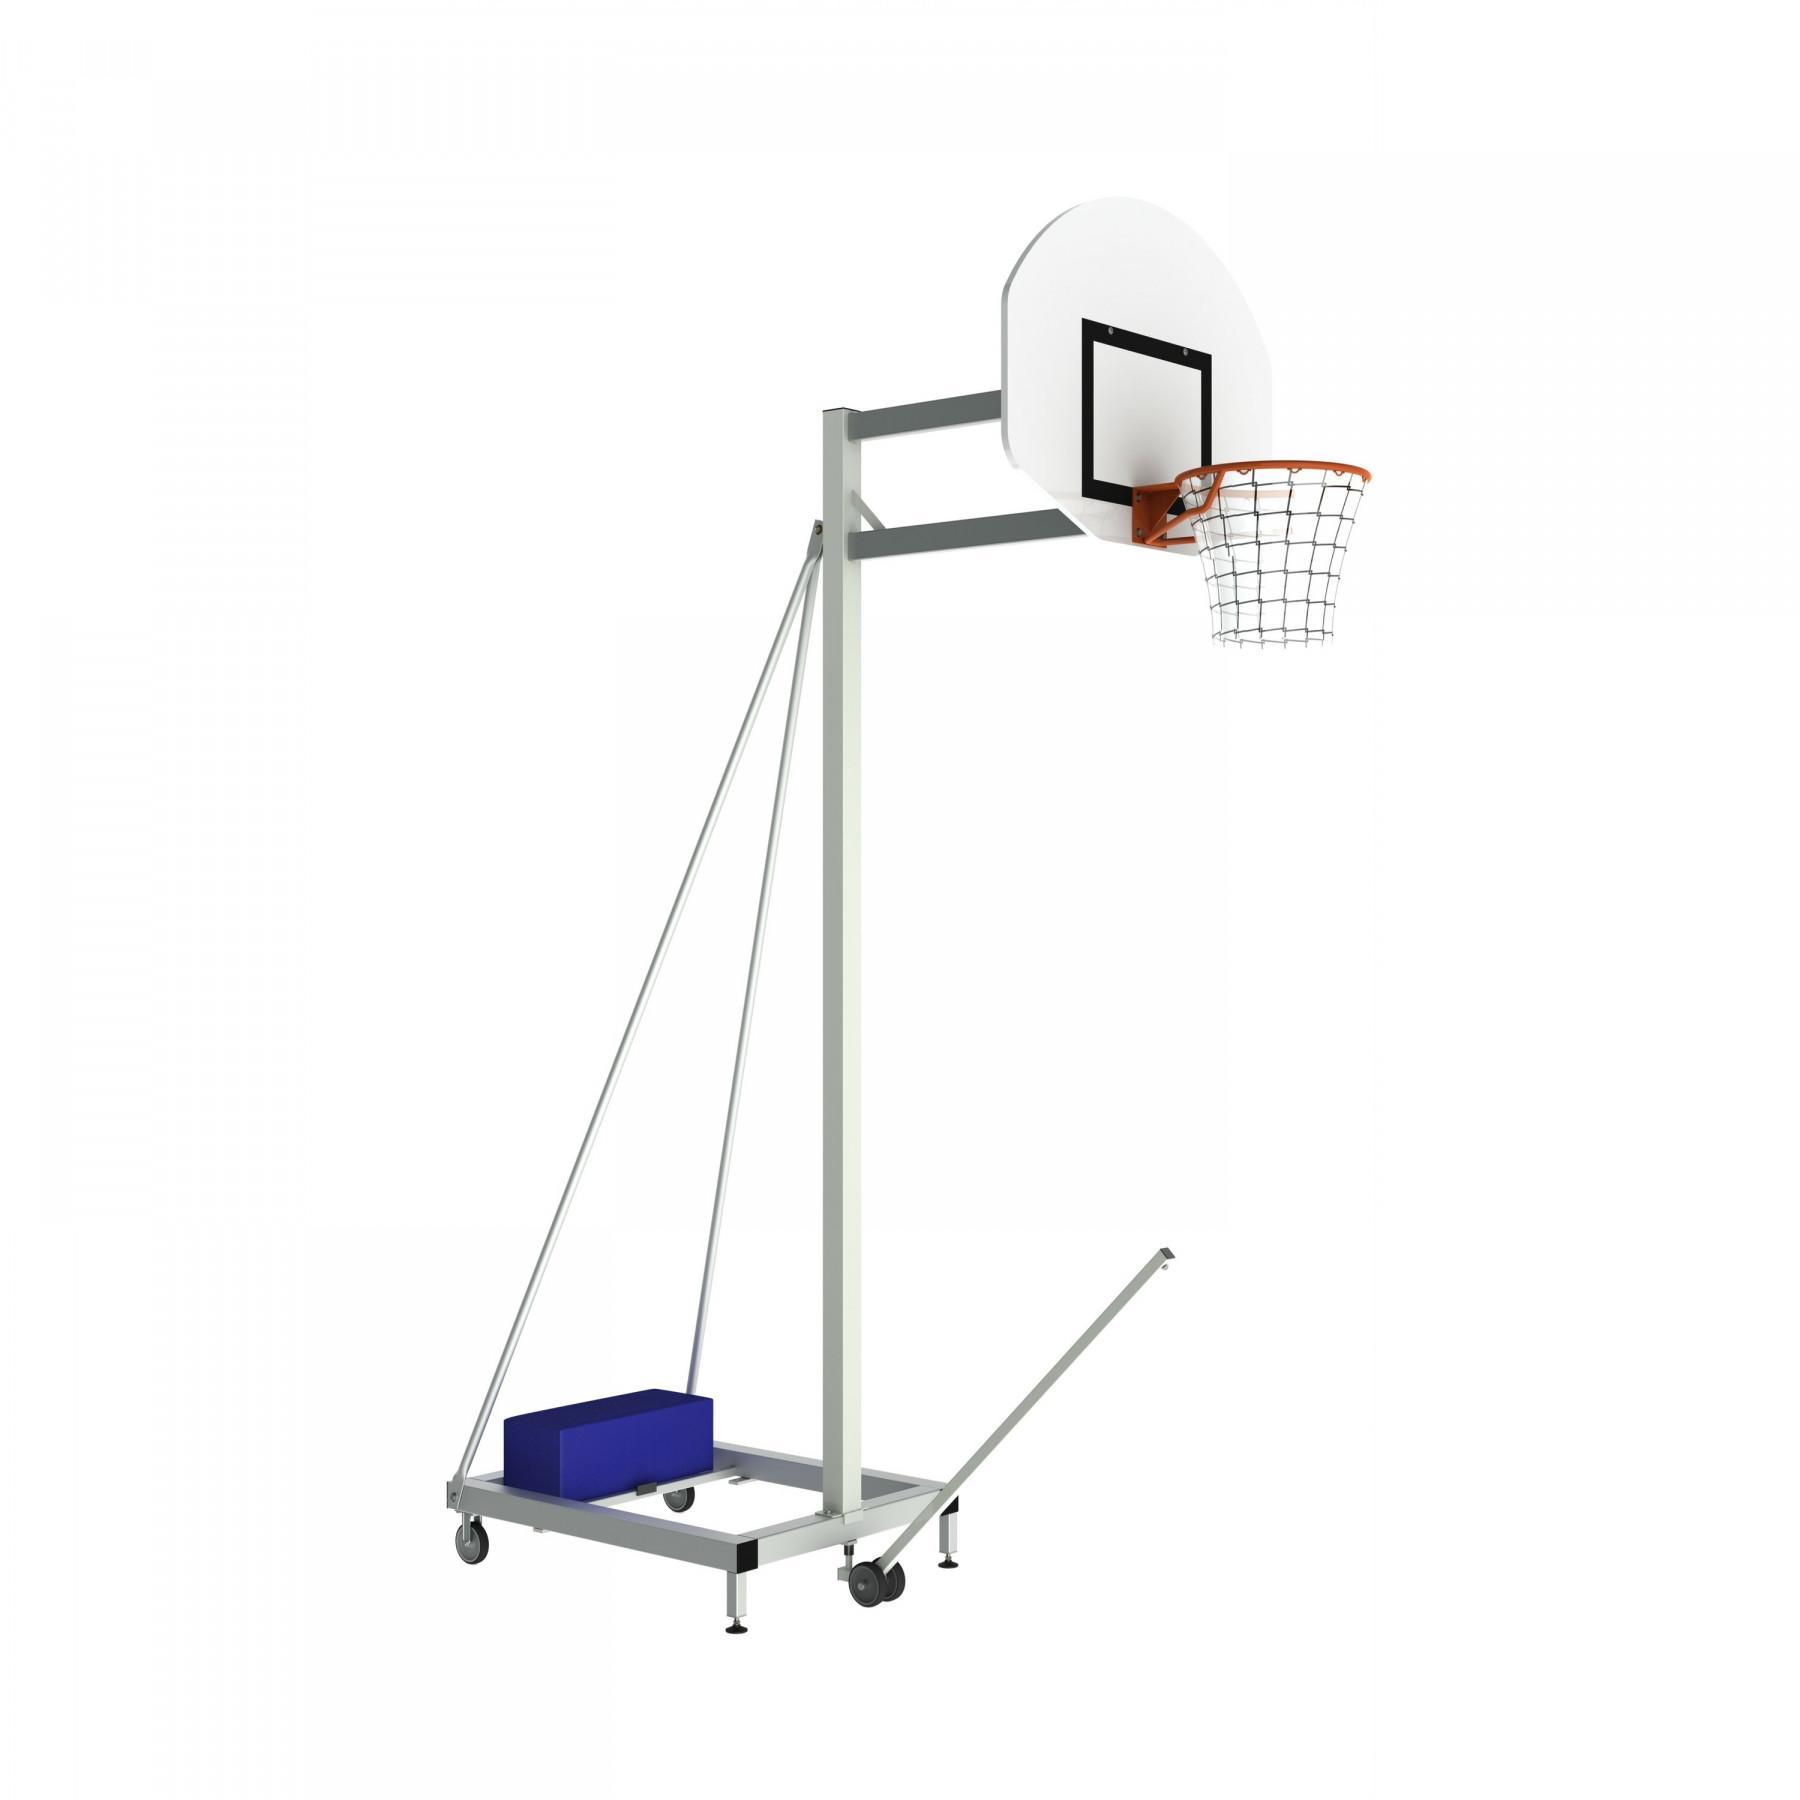 Fixed head for basketball hoop height 2.60m offset 1m Sporti France